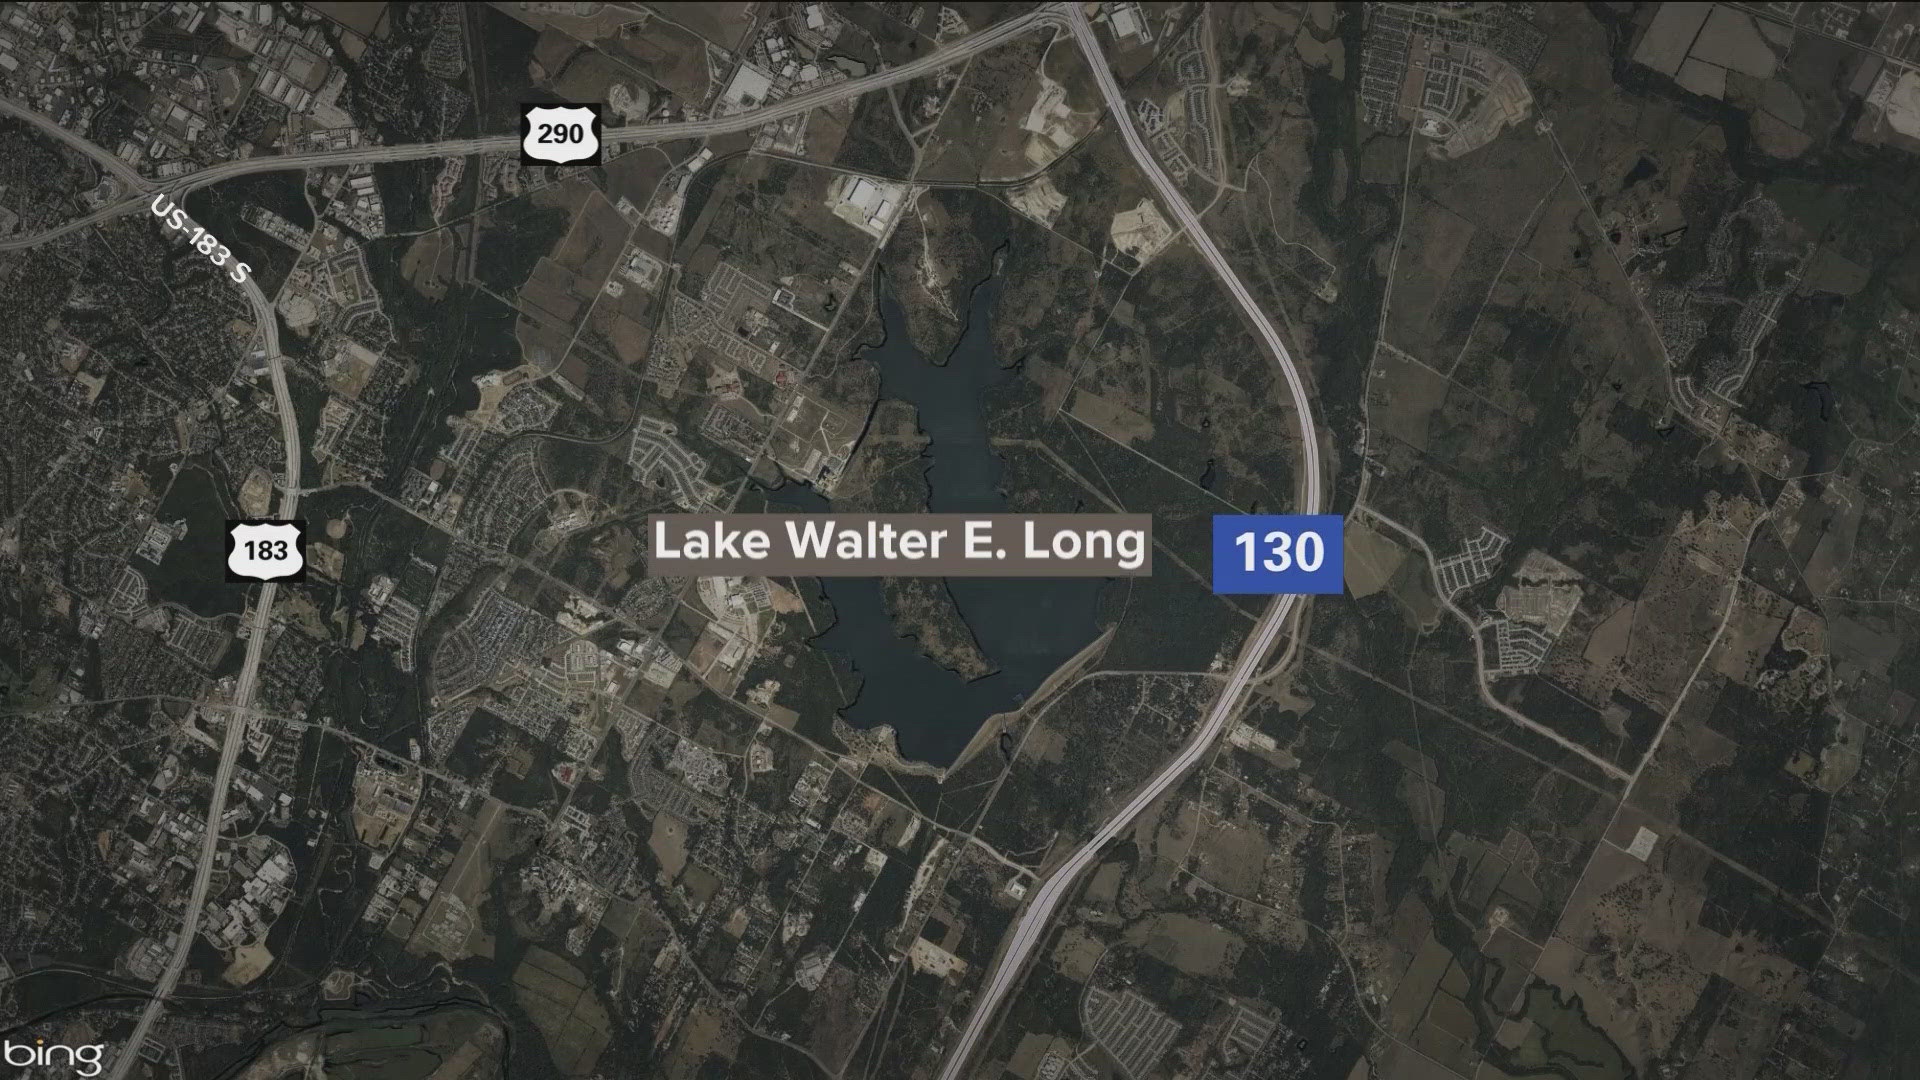 A person was found dead at Lake Walter E. Long in eastern Travis County on Monday evening. Police have not identified the person.